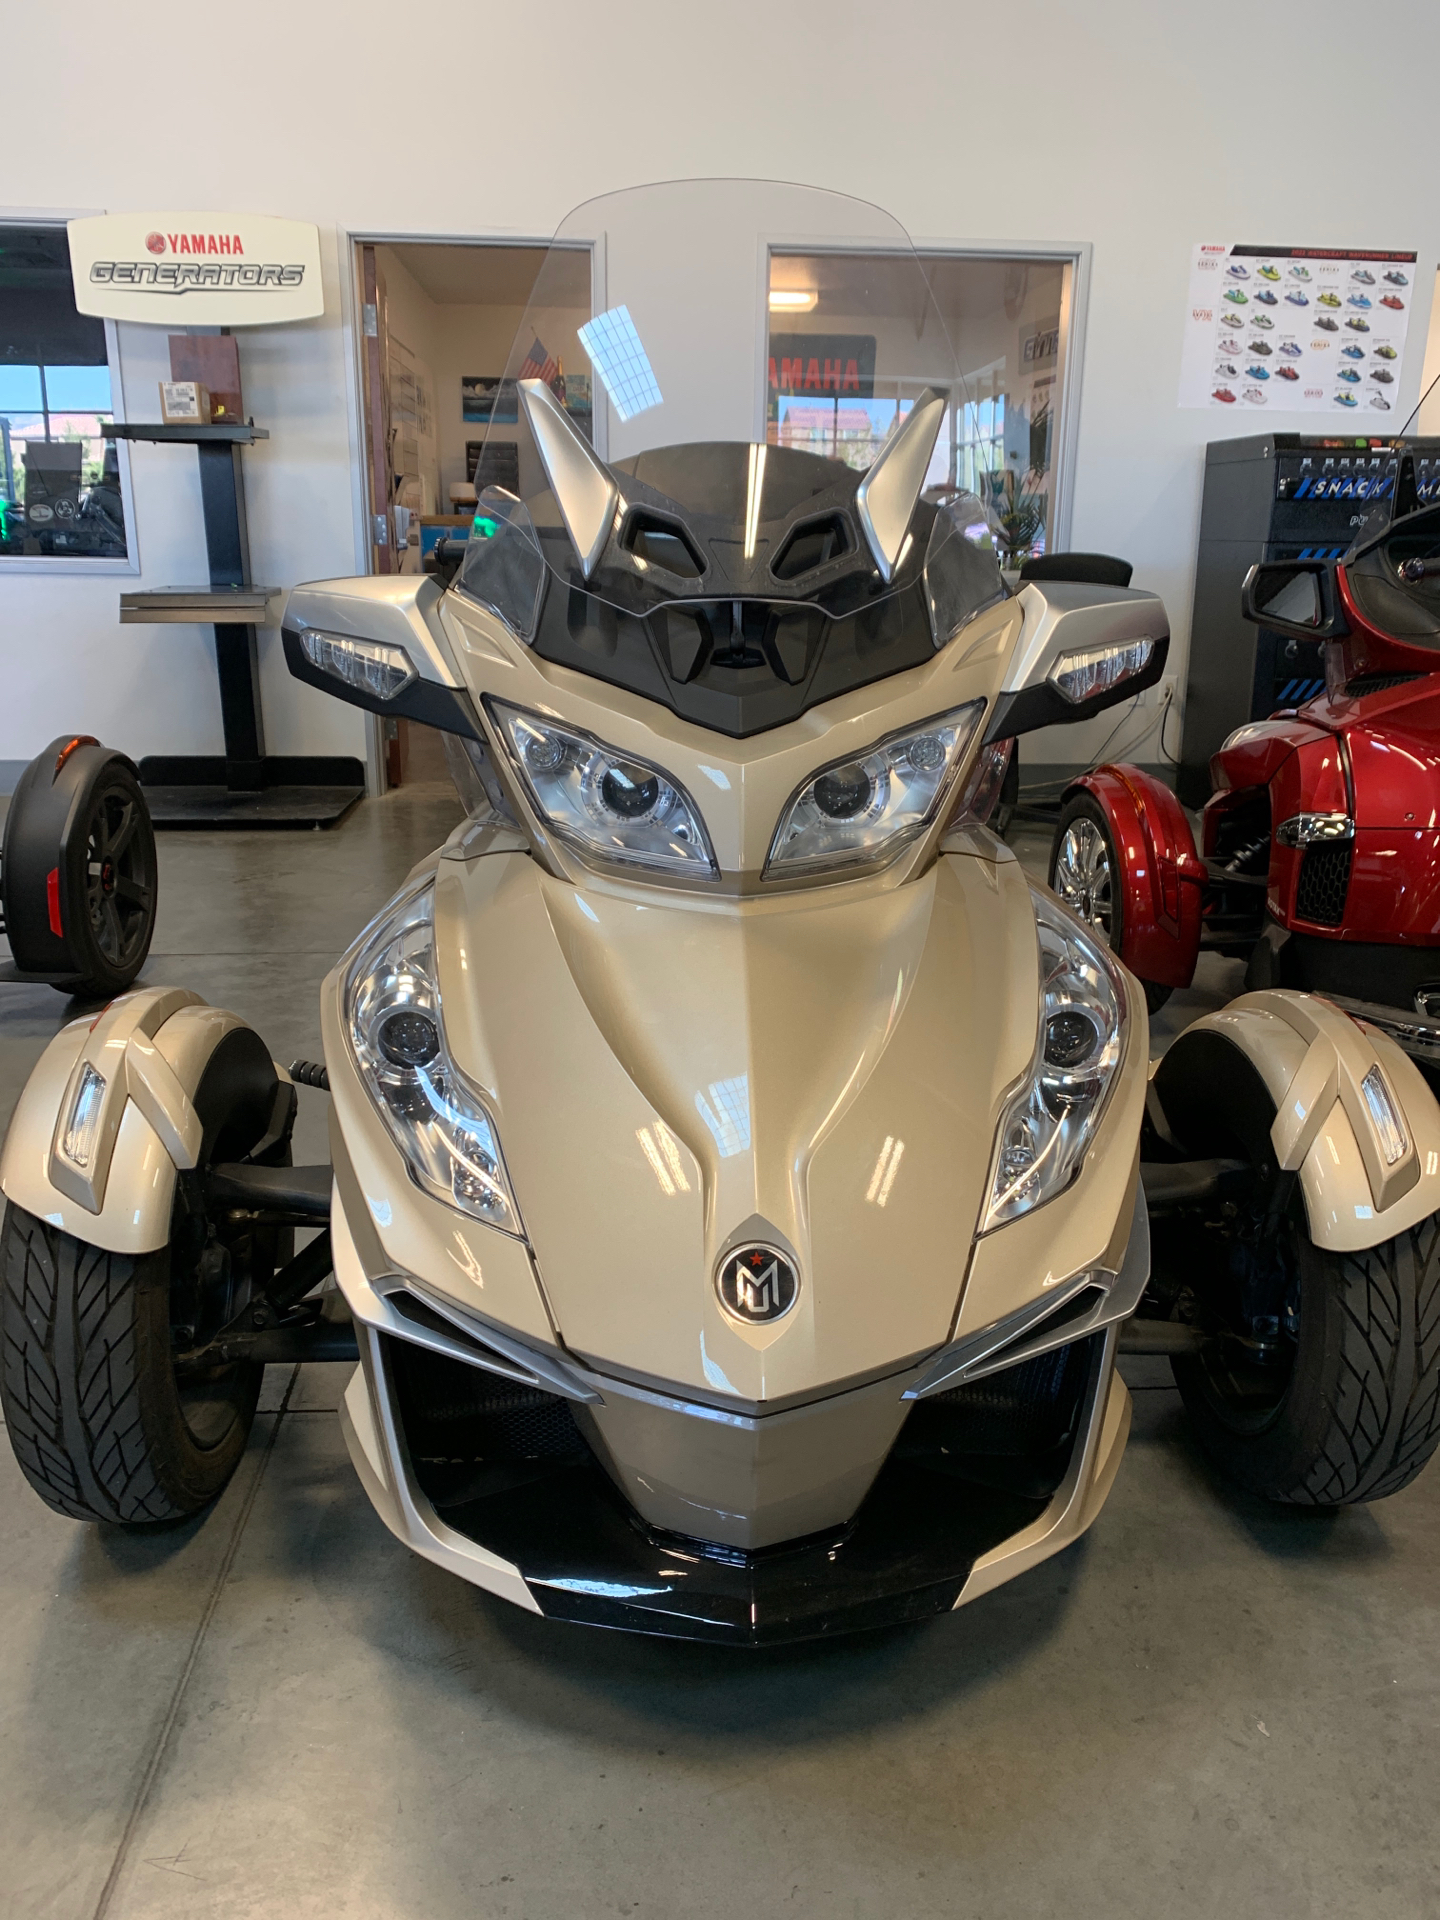 2017 Can-Am Spyder RT-S in Las Vegas, Nevada - Photo 1